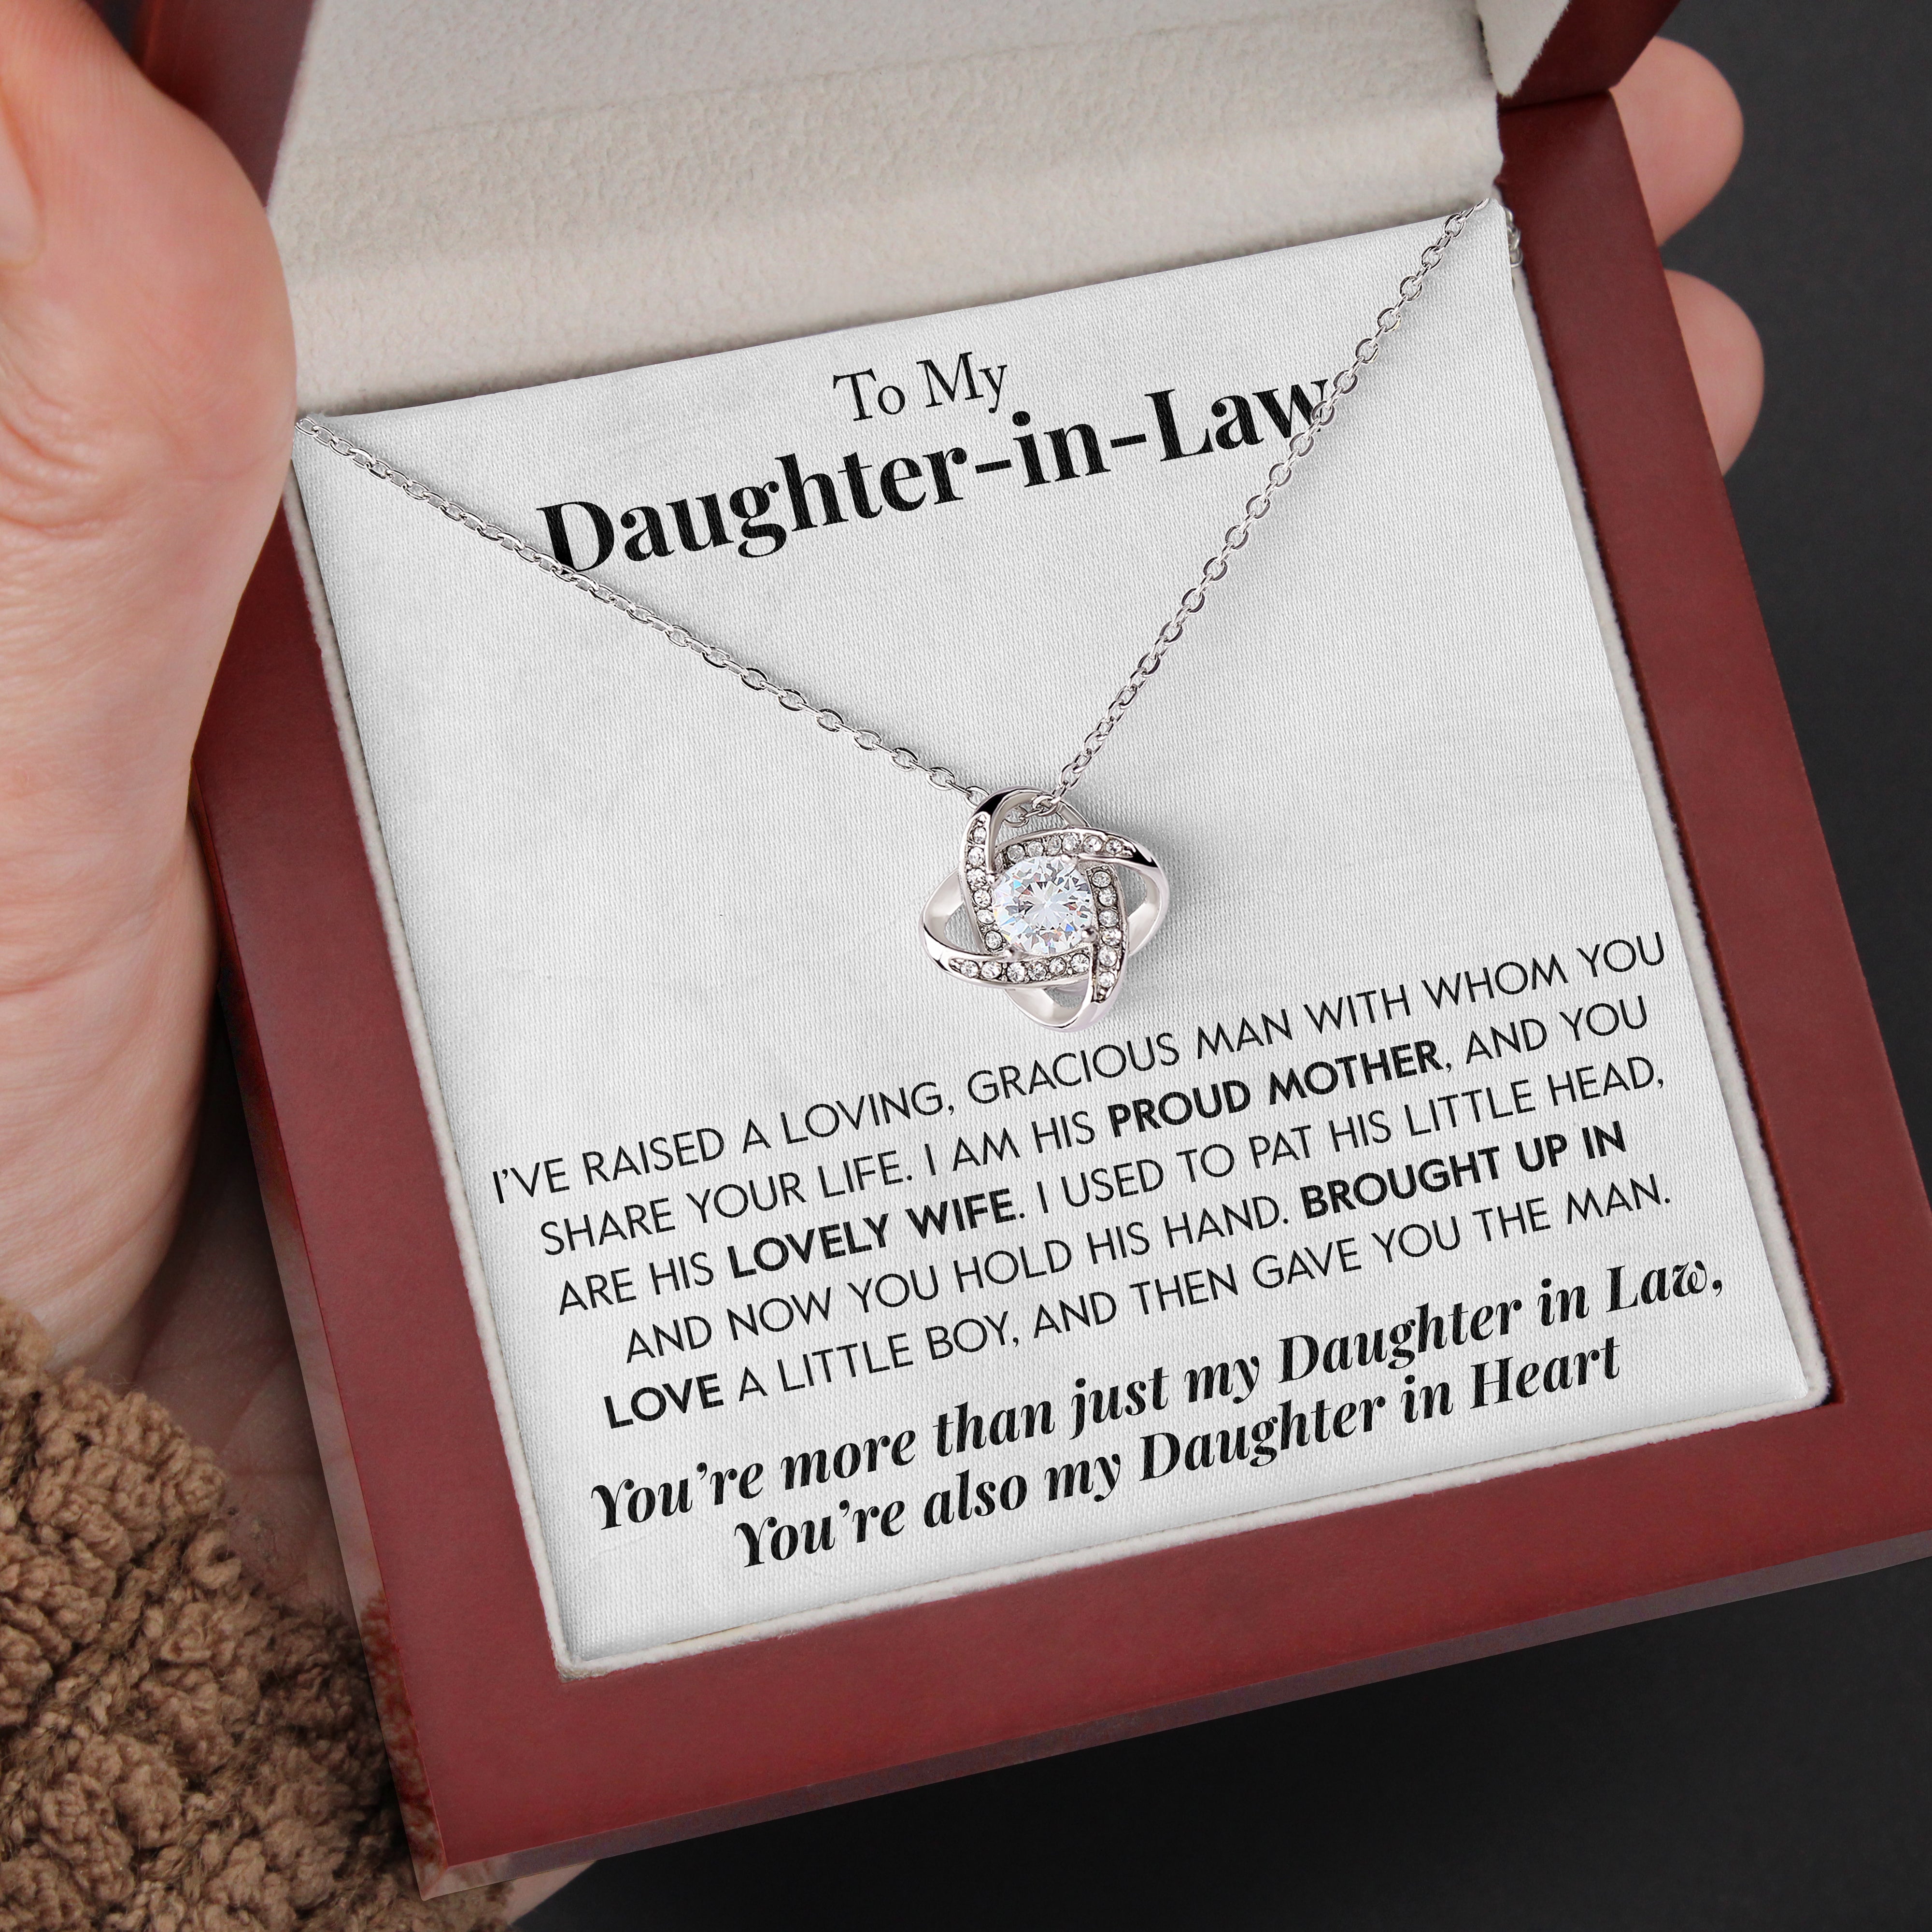 To My Daughter-in-Law | "Lovely Wife" | Love Knot Necklace